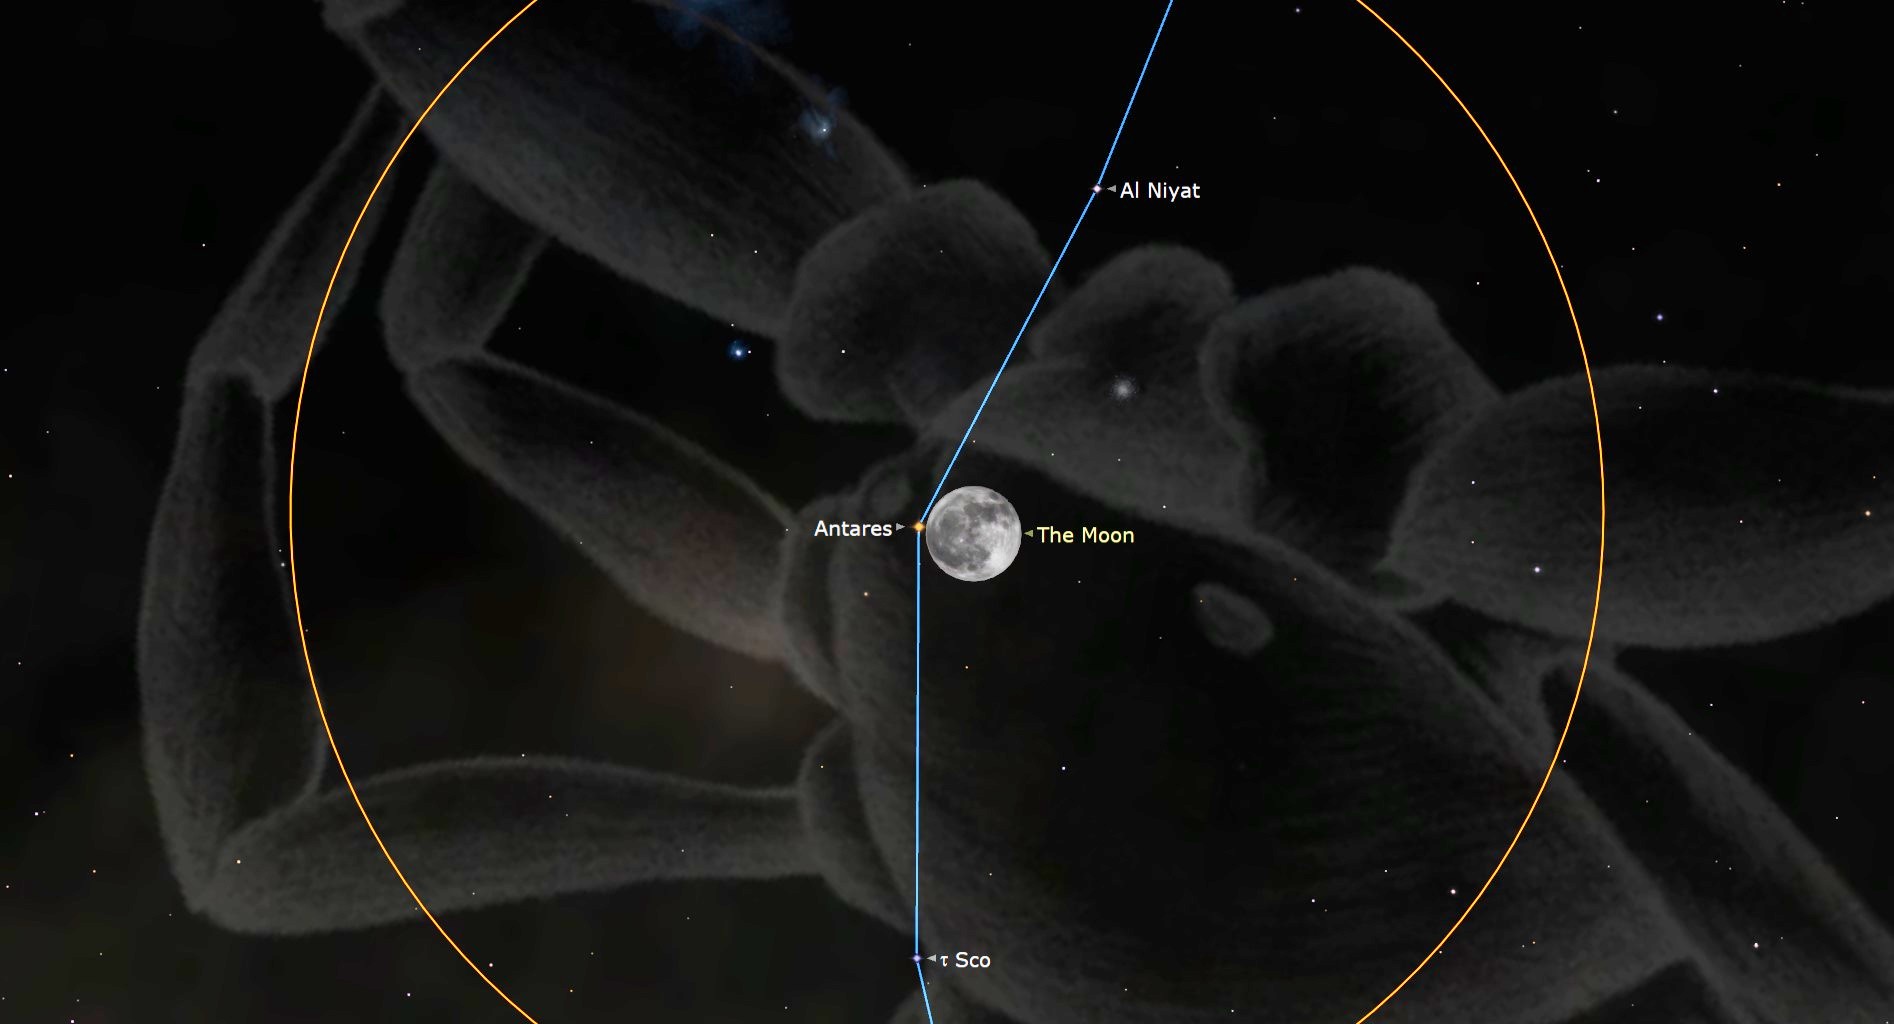 How to watch bright red star Antares disappear behind the moon on May 23